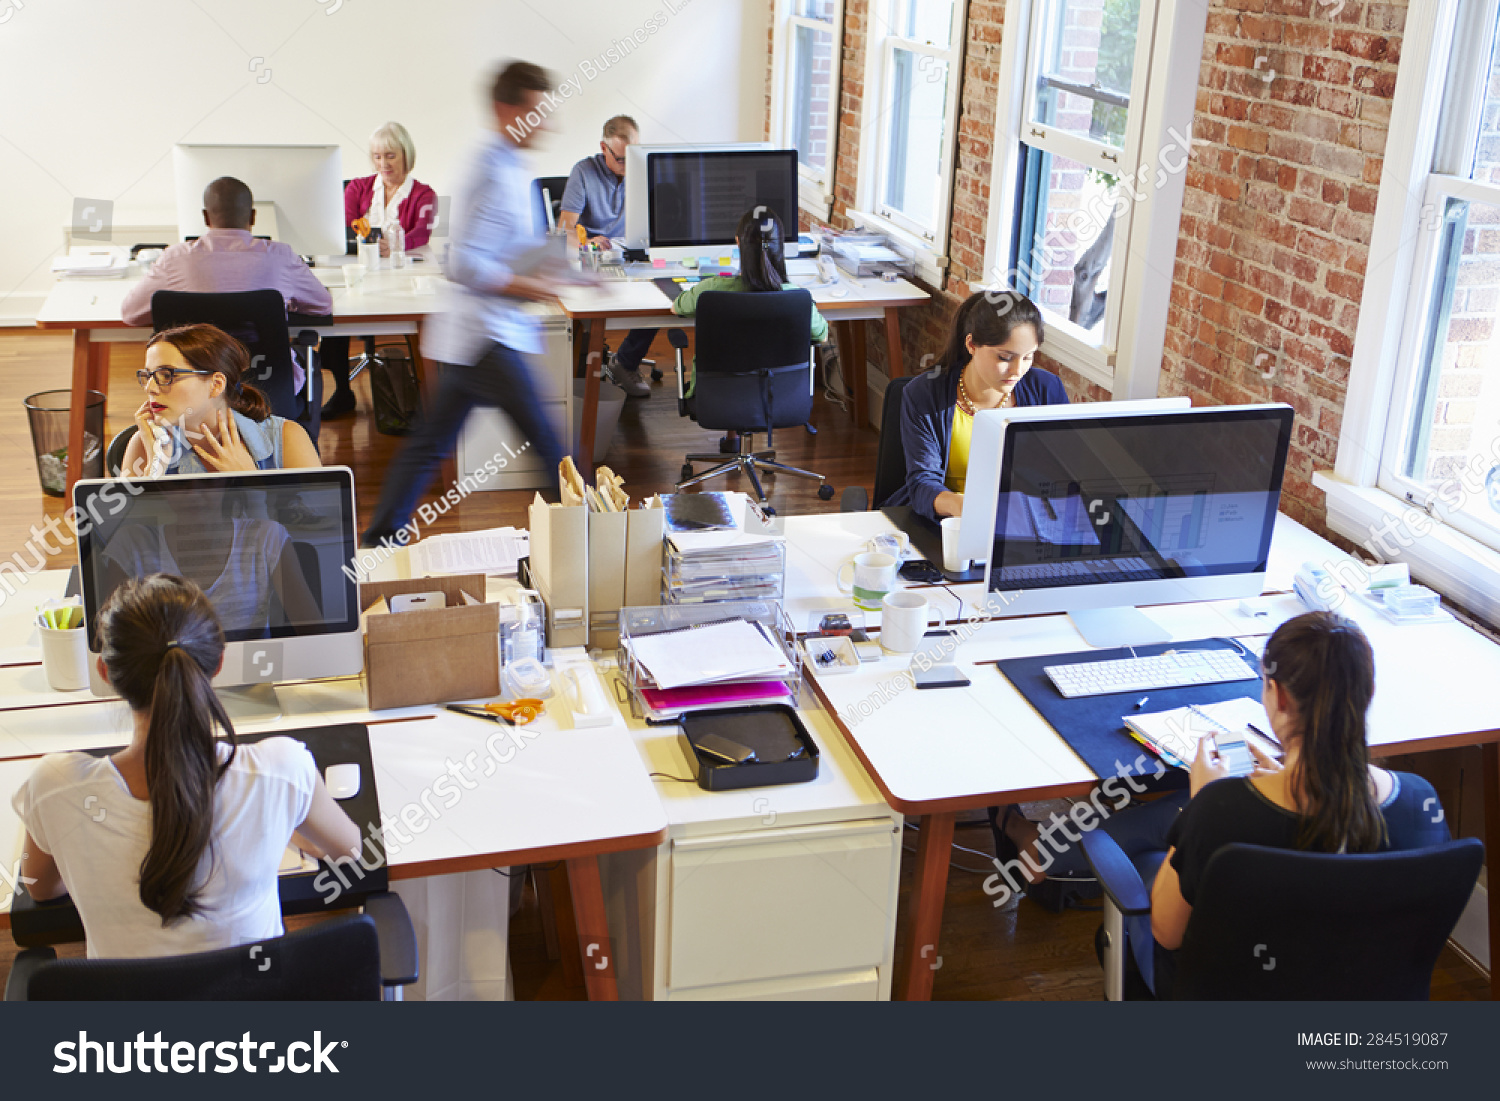 Wide Angle View Of Busy Design Office With Workers At Desks #284519087